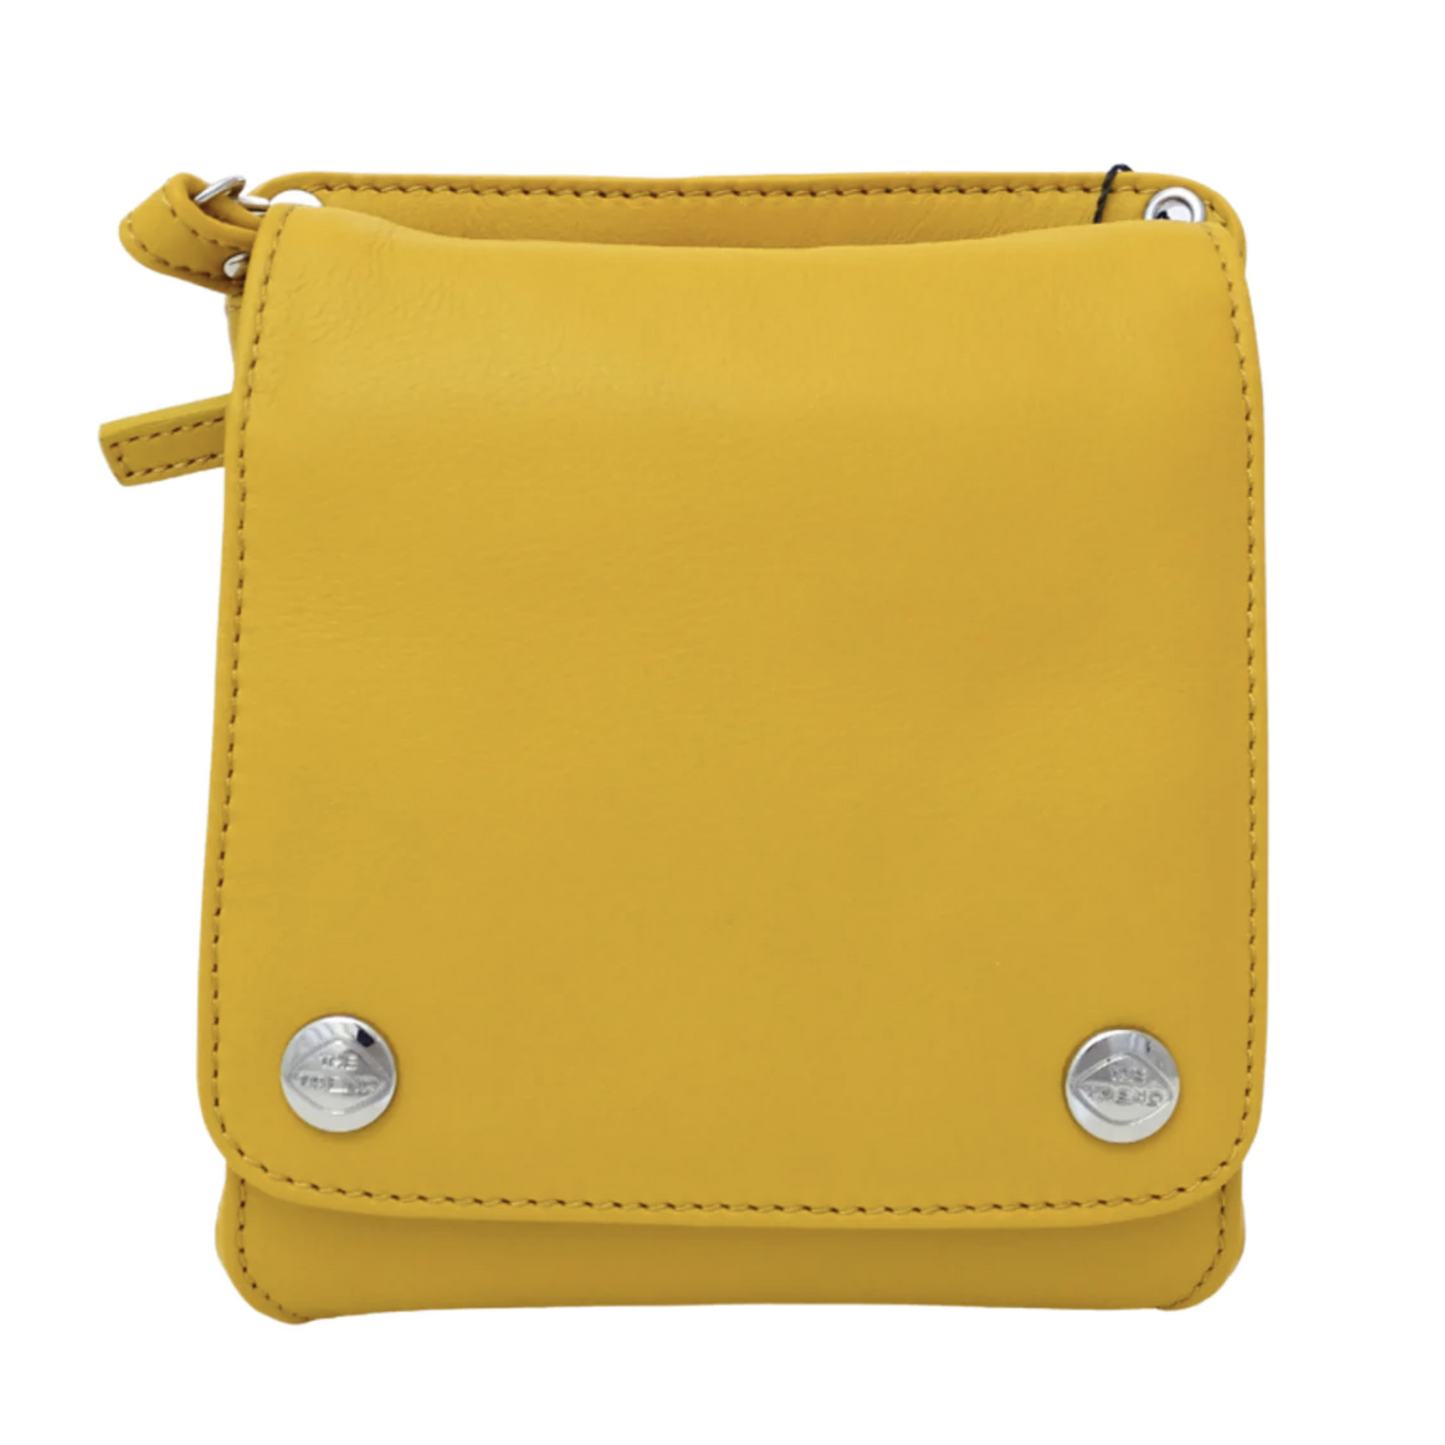 The front of a mustard yellow leather bag, with a square face and two shiny silver metal buttons, each bearing "The Trend" logo.